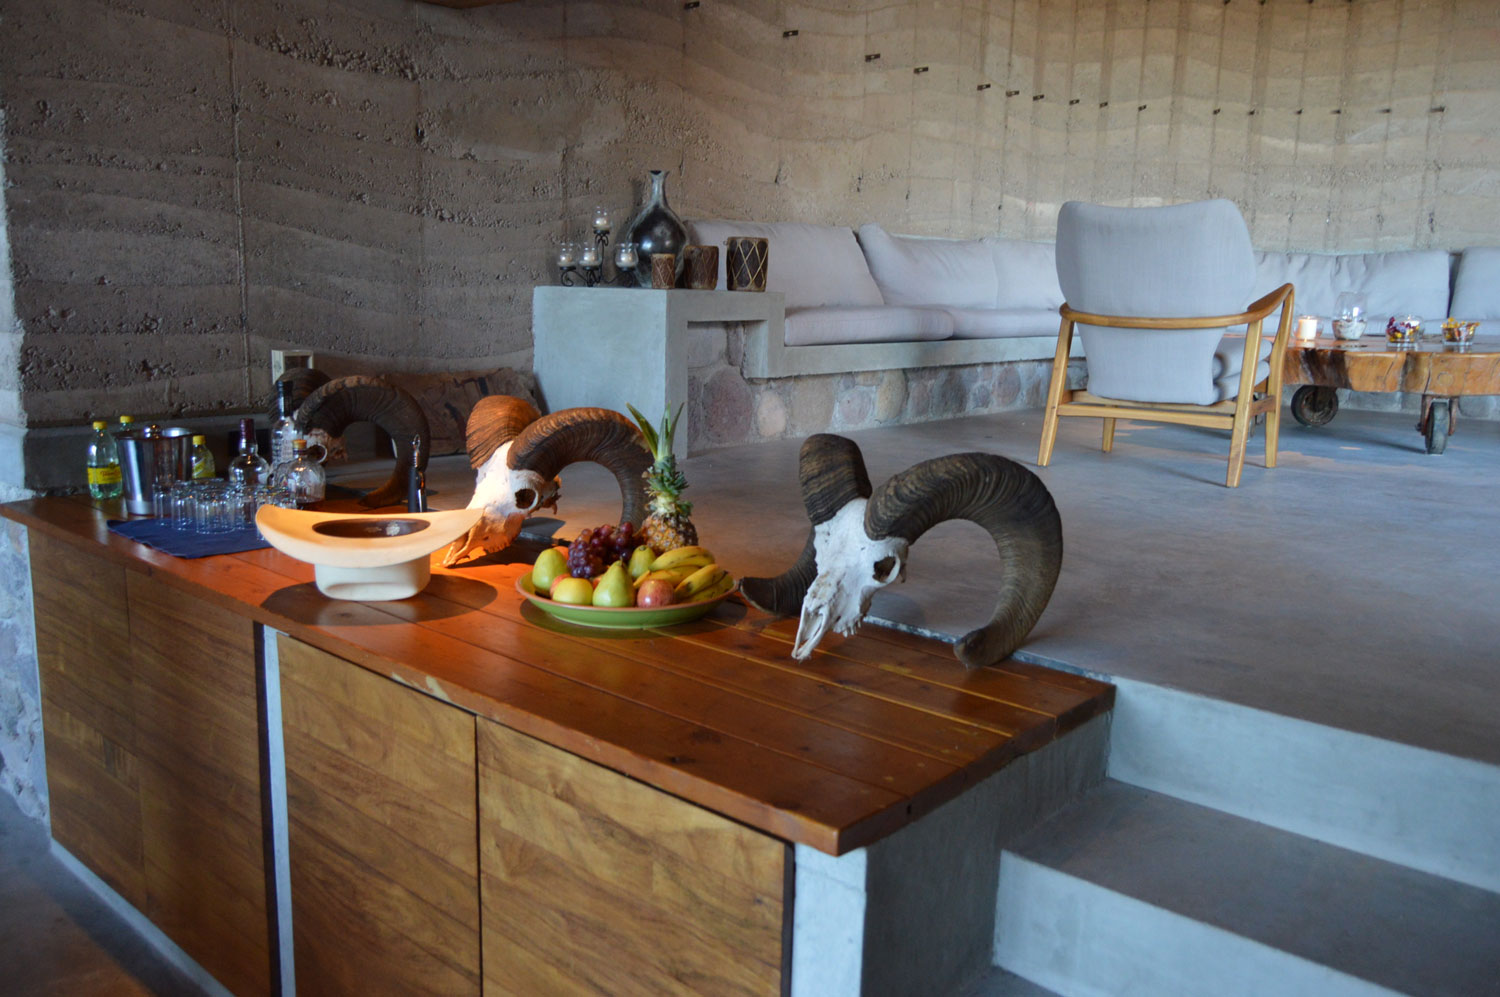 Rustic seating area and service counter in La Cueva with ram's skulls, fruit and cowboy hat